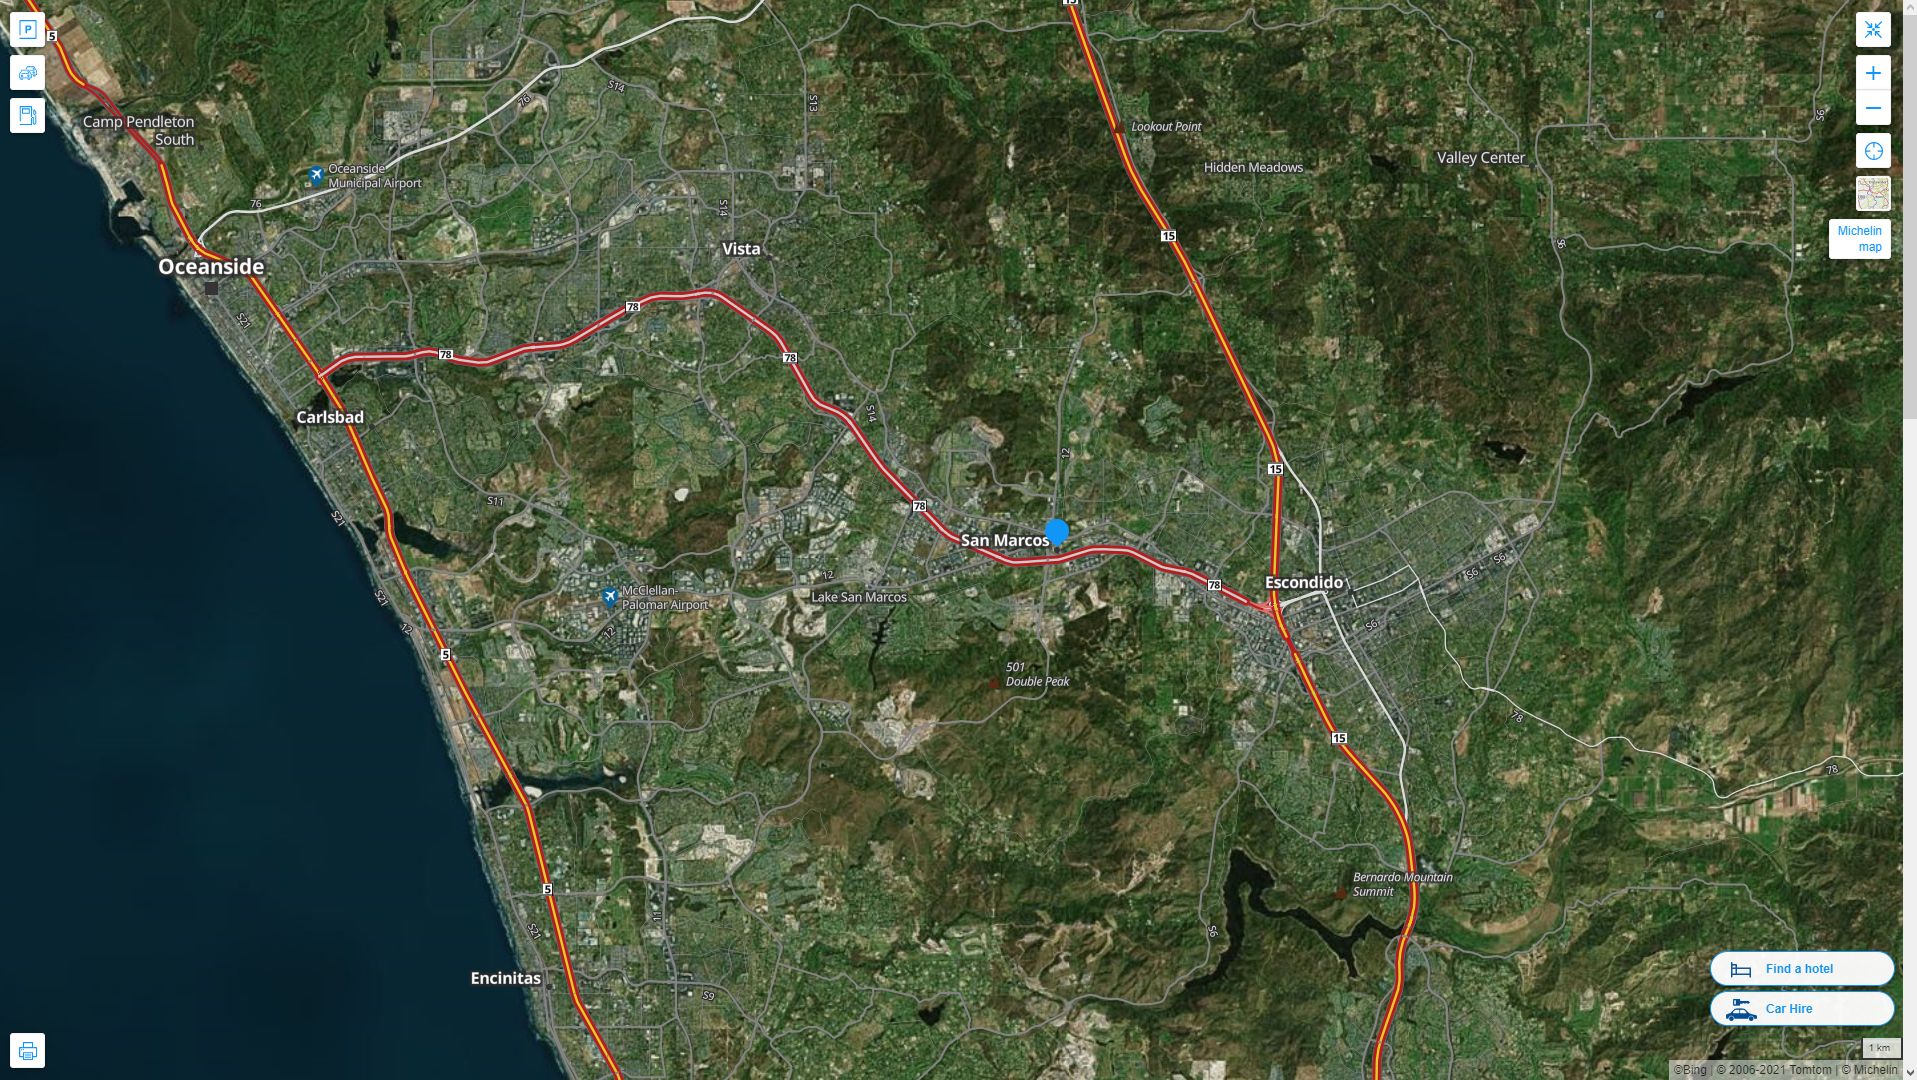 San Marcos California Highway and Road Map with Satellite View